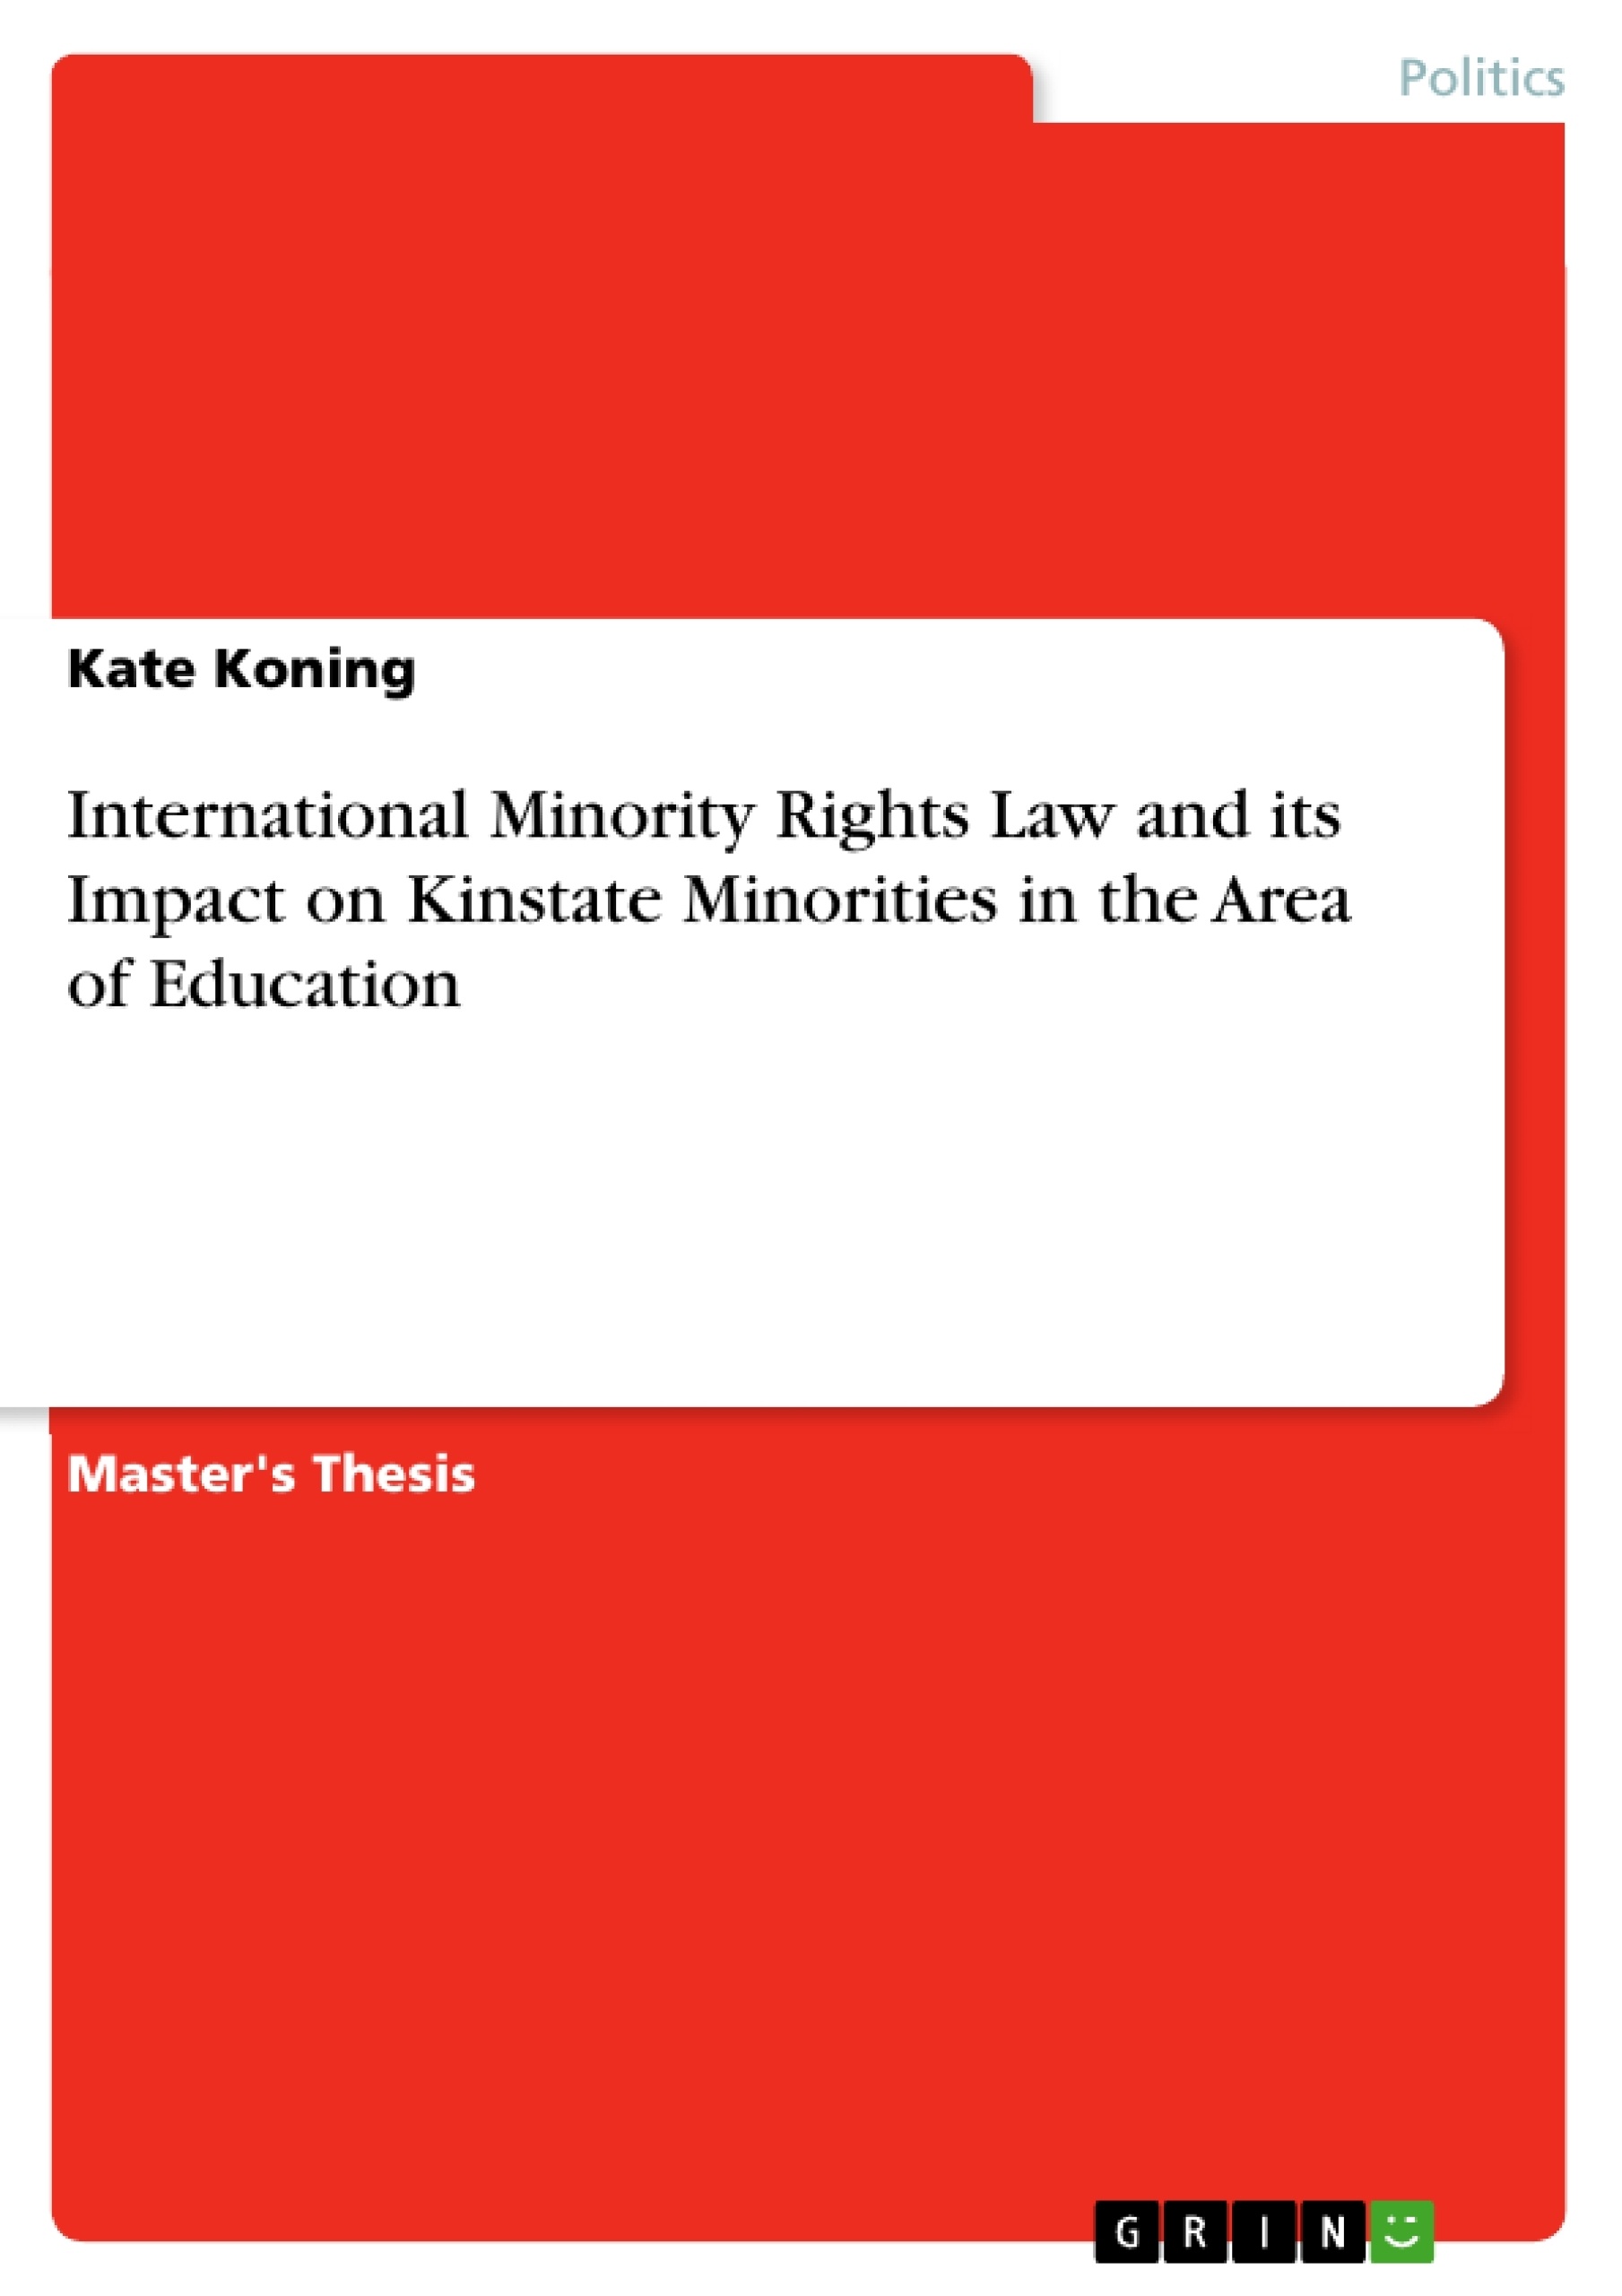 Titre: International Minority Rights Law and its Impact on Kinstate Minorities in the Area of Education